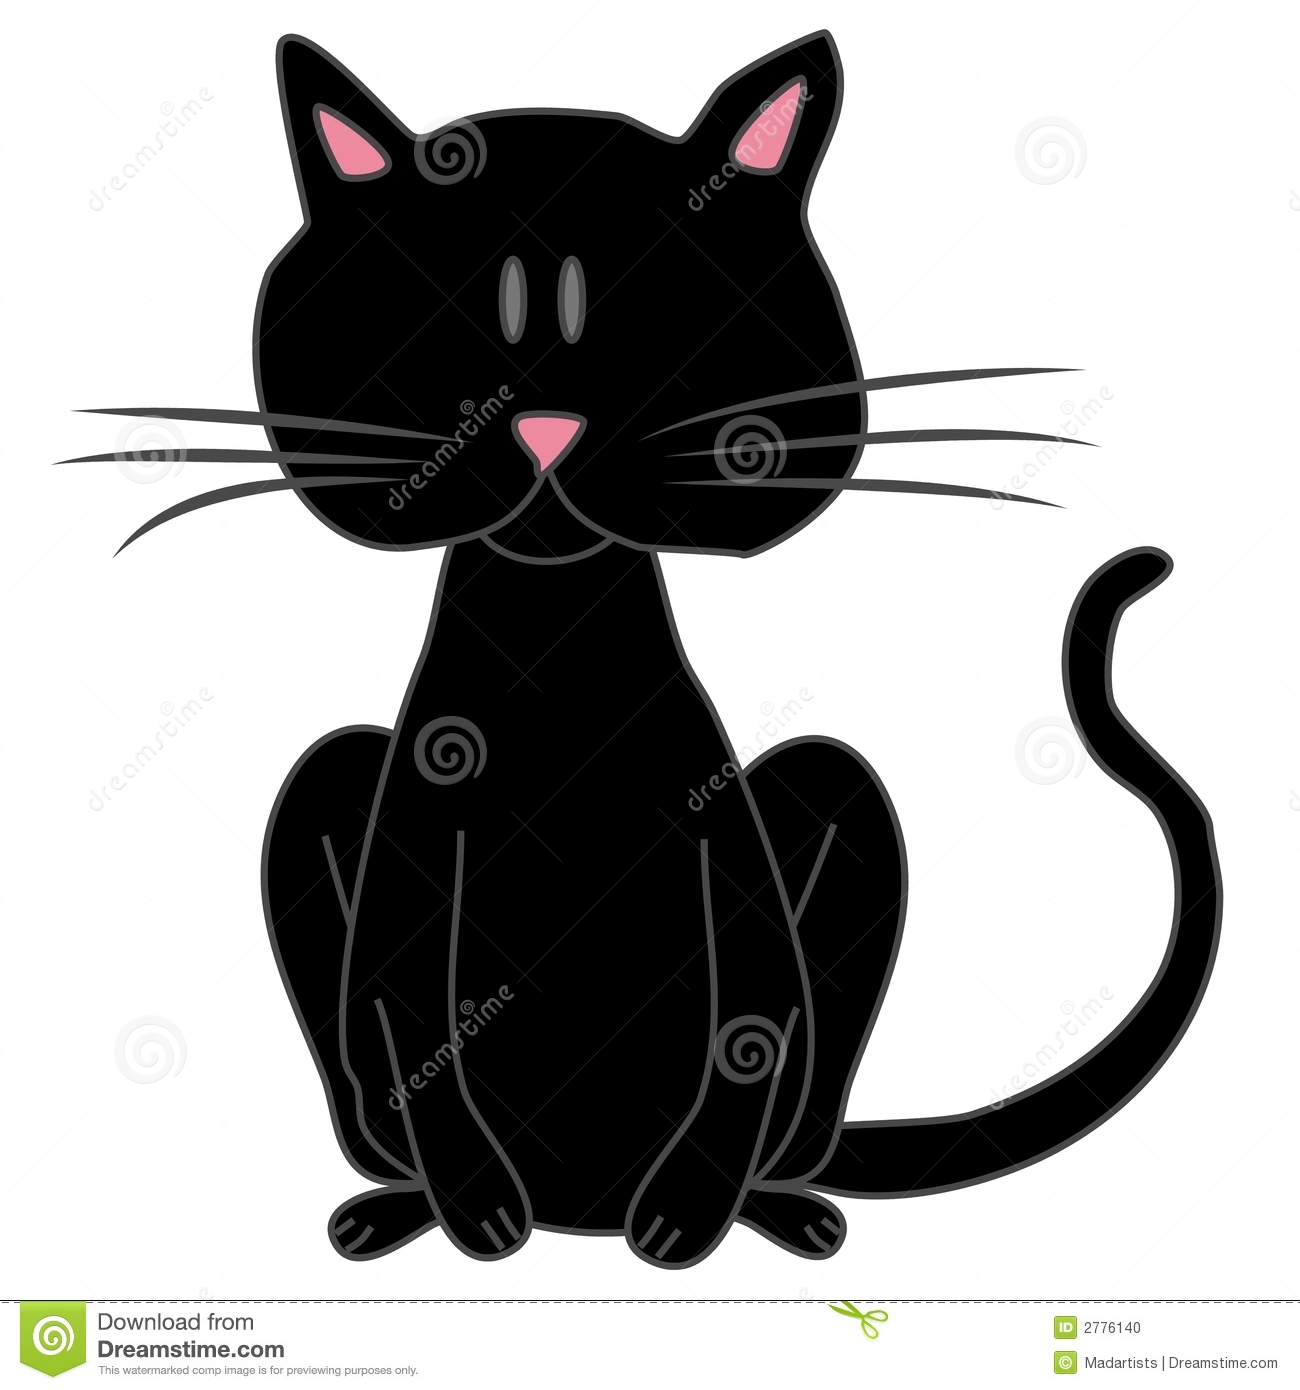 An Illustration Of A Cartoon Black Kitty Cat With Pink Ears And Nose